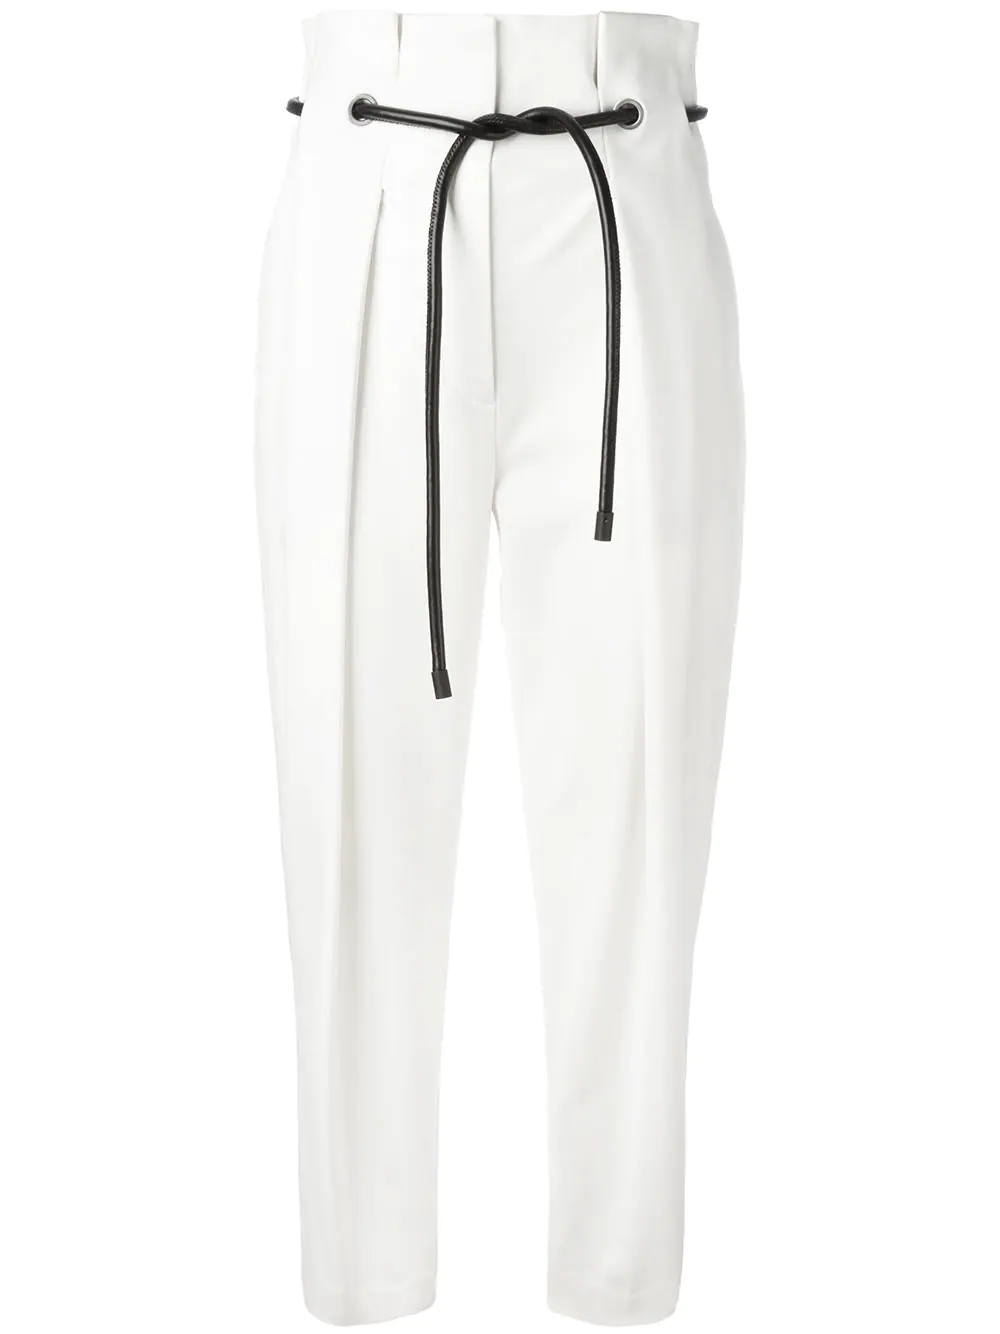 Origami Pleated Pant (Antique White)